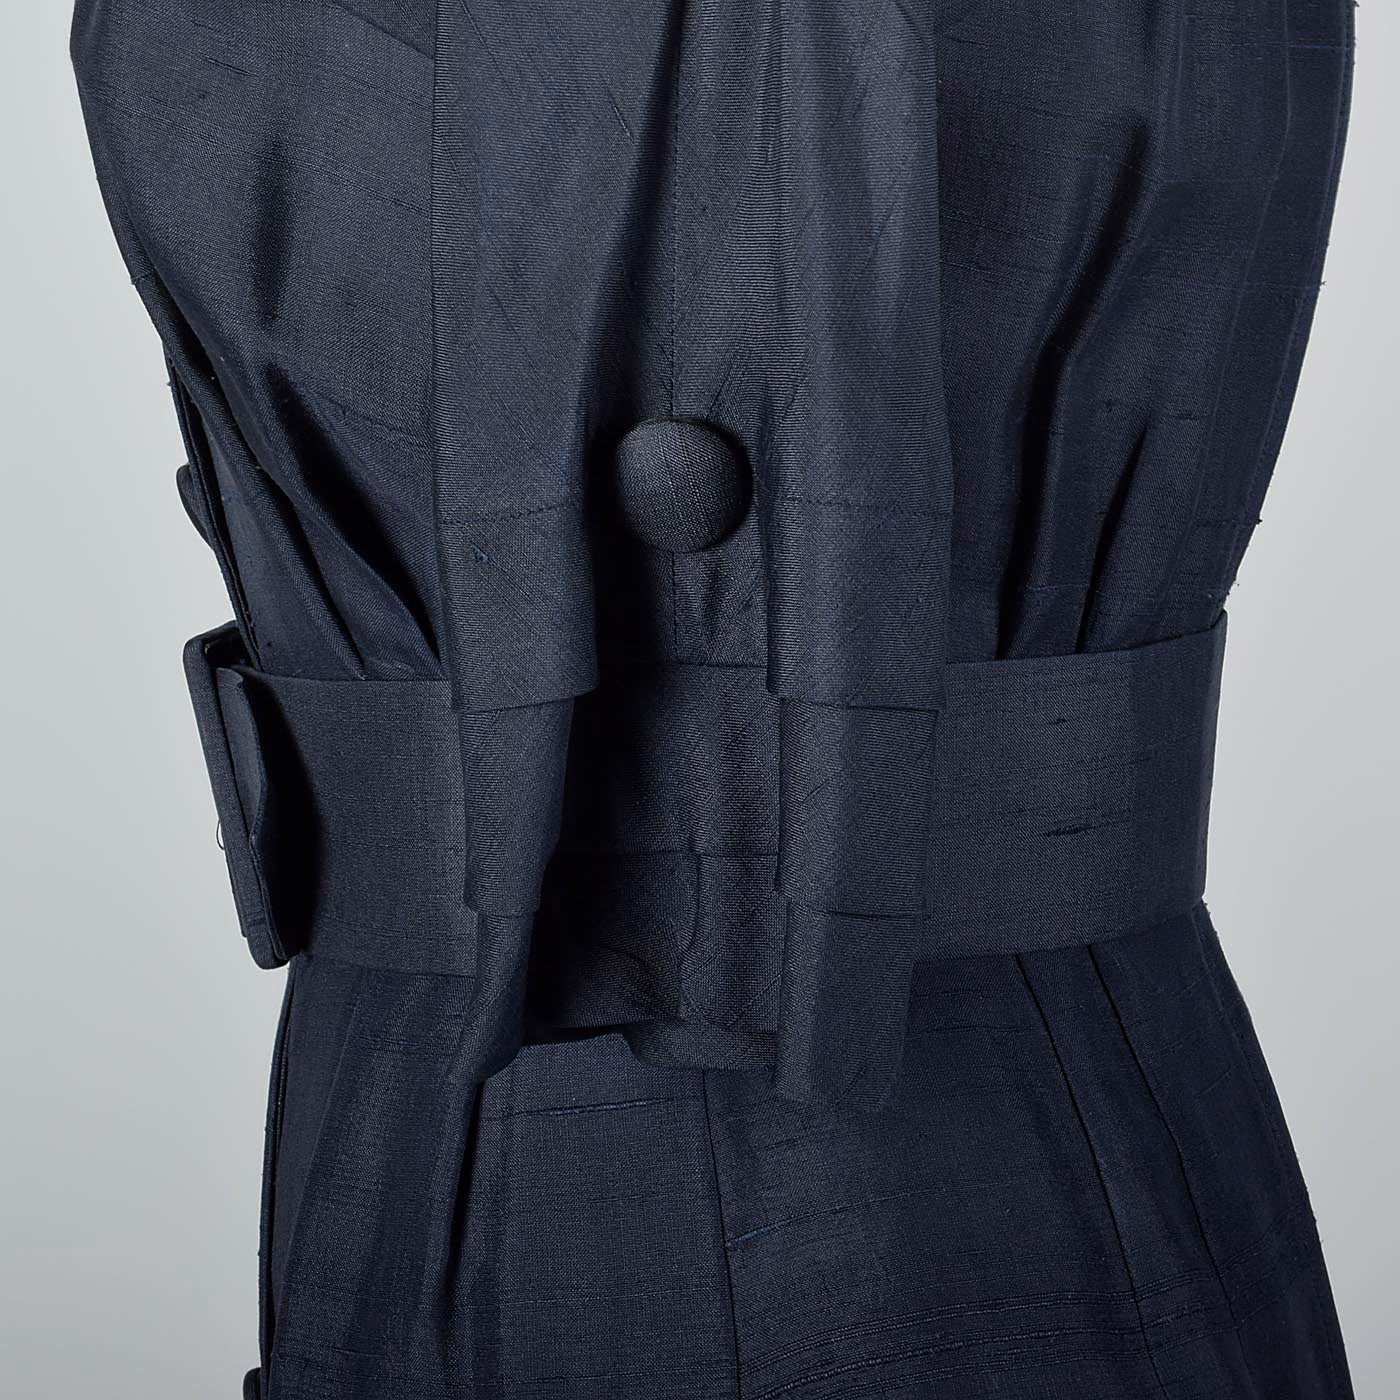 1950s Navy Silk Dress with Wide Belt and Decorative Buttons